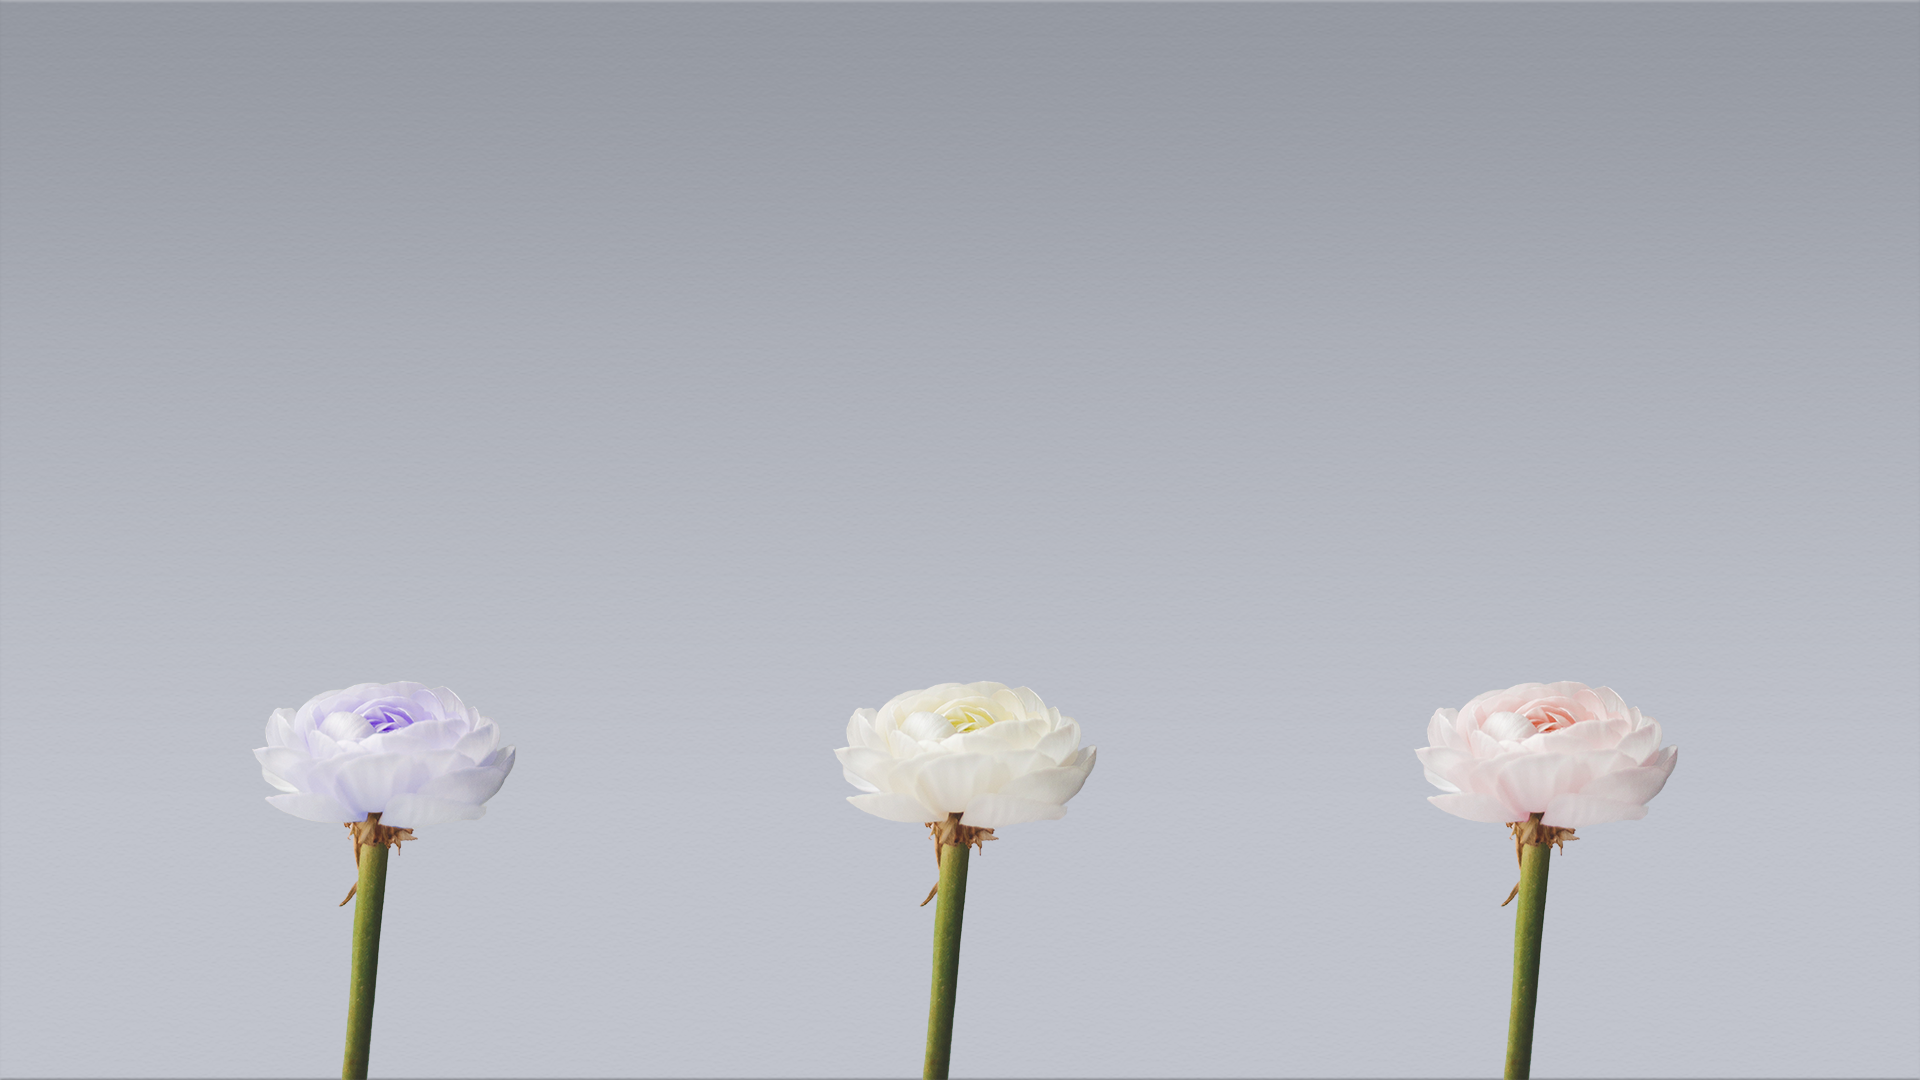 General 1920x1080 flowers photo manipulation simple background